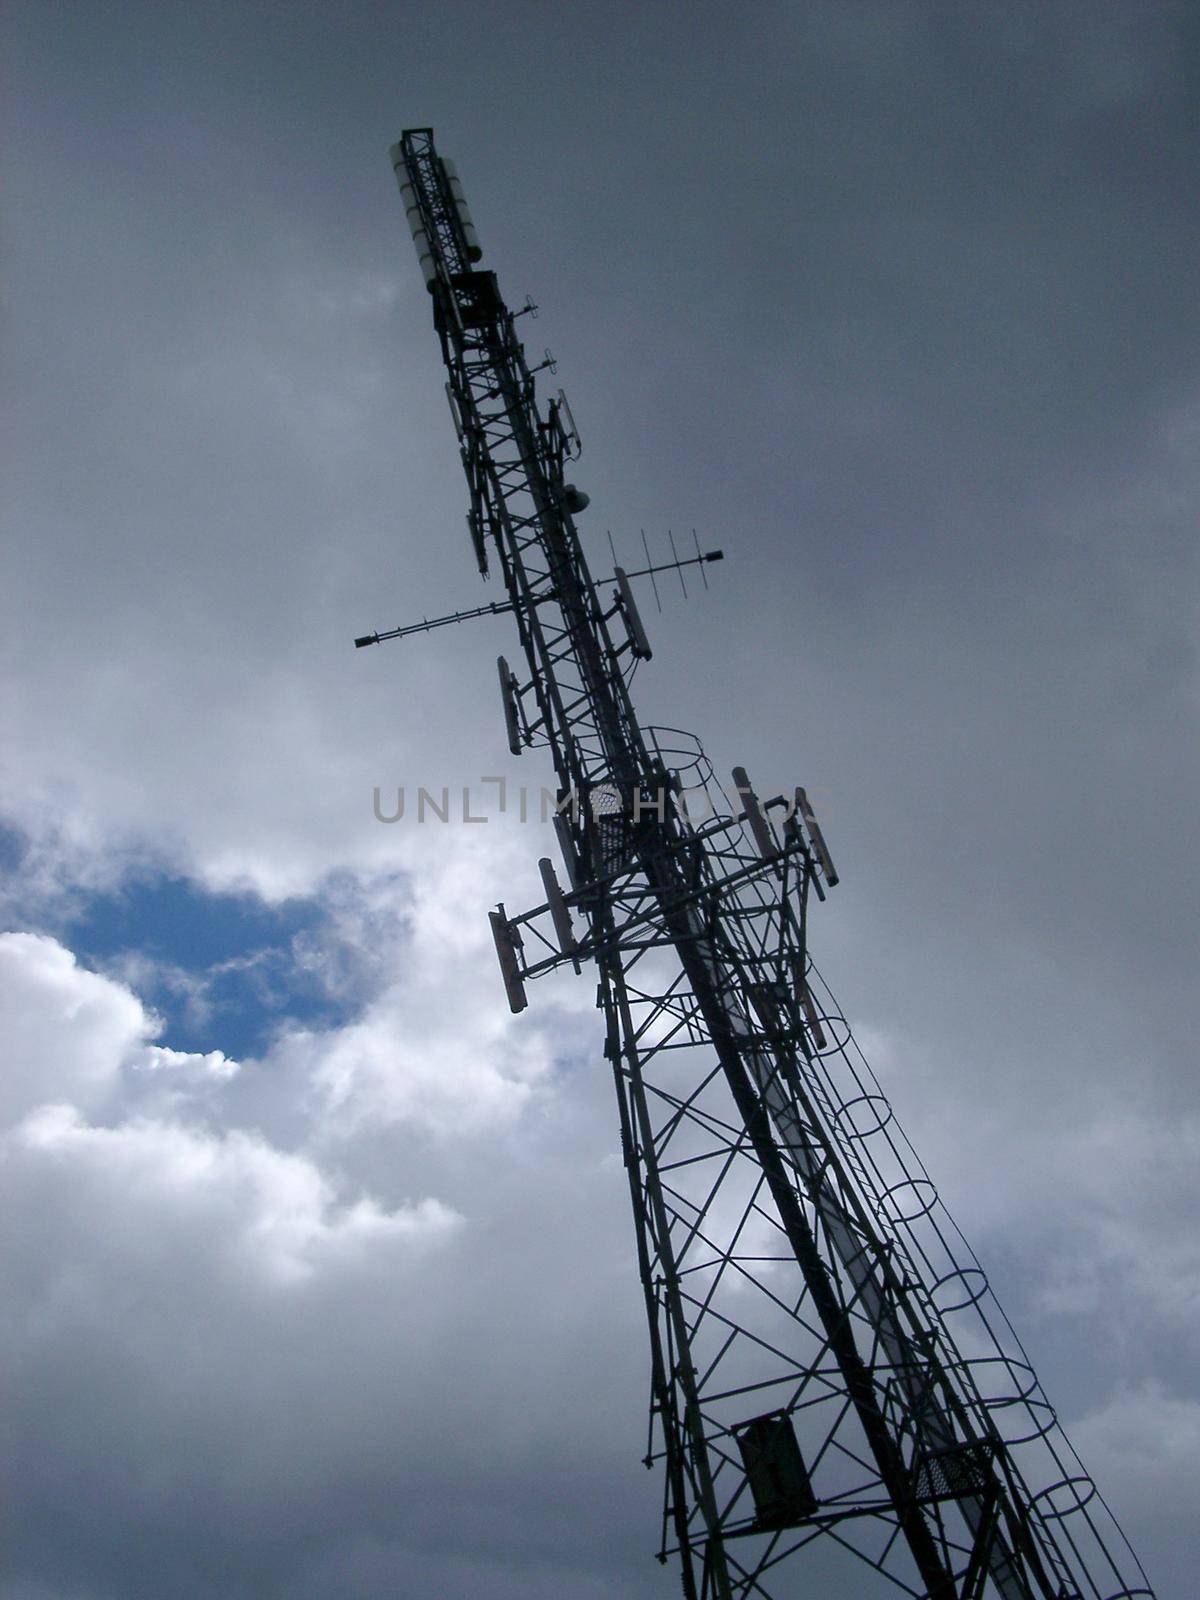 Vert tall steel lattice communications tower stretching up towards the cloudy blue sky with antennas and radio dishes mounted up its length